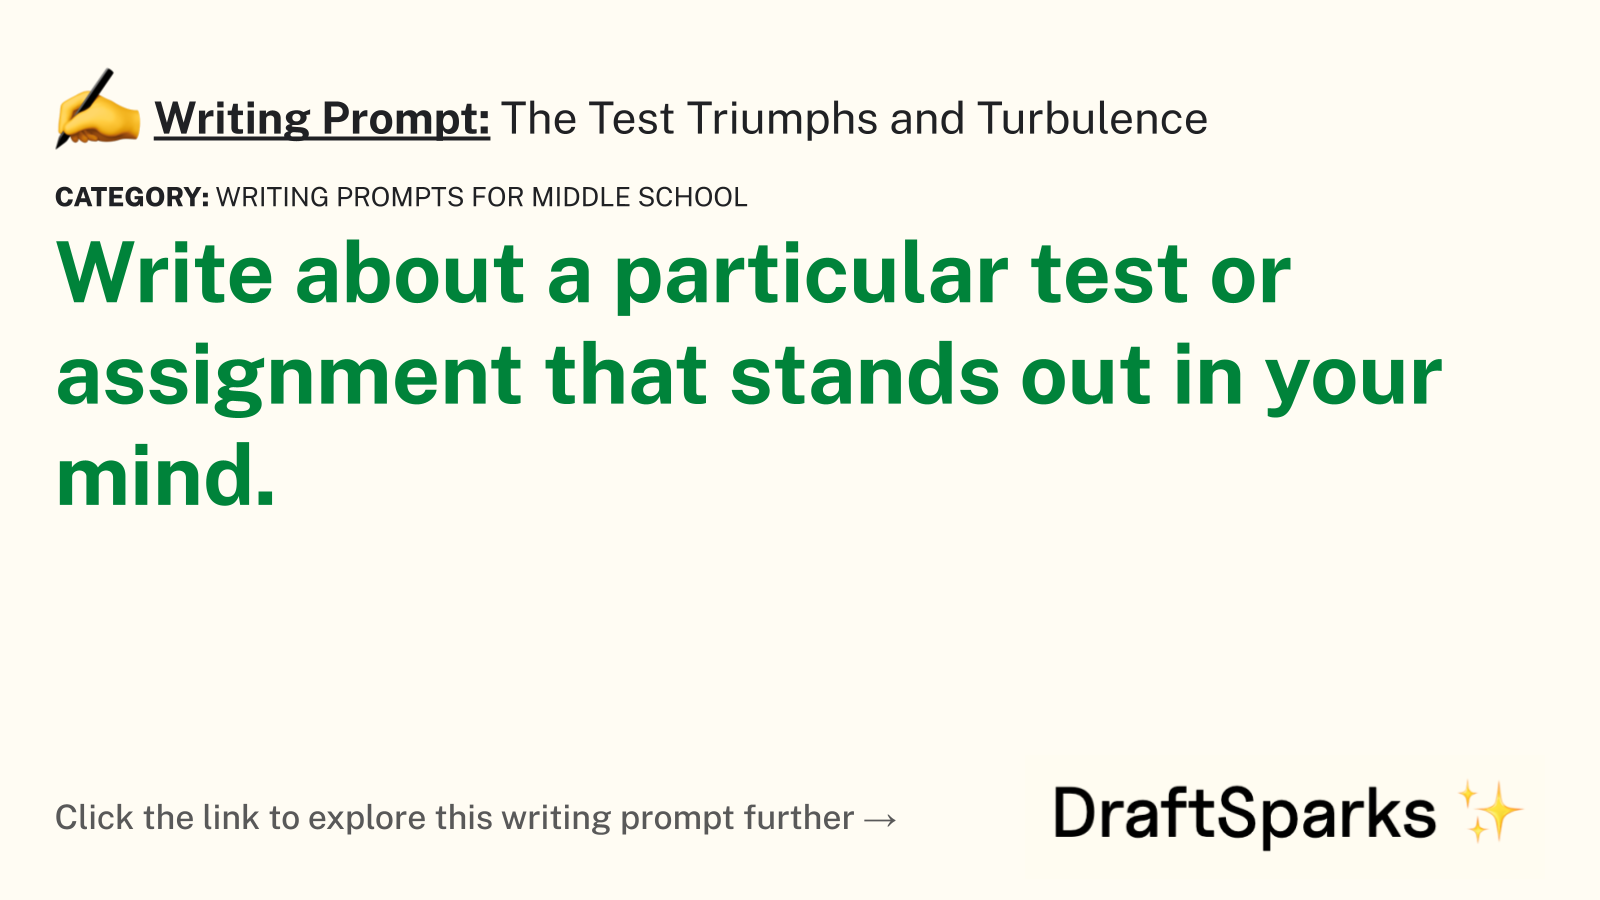 The Test Triumphs and Turbulence